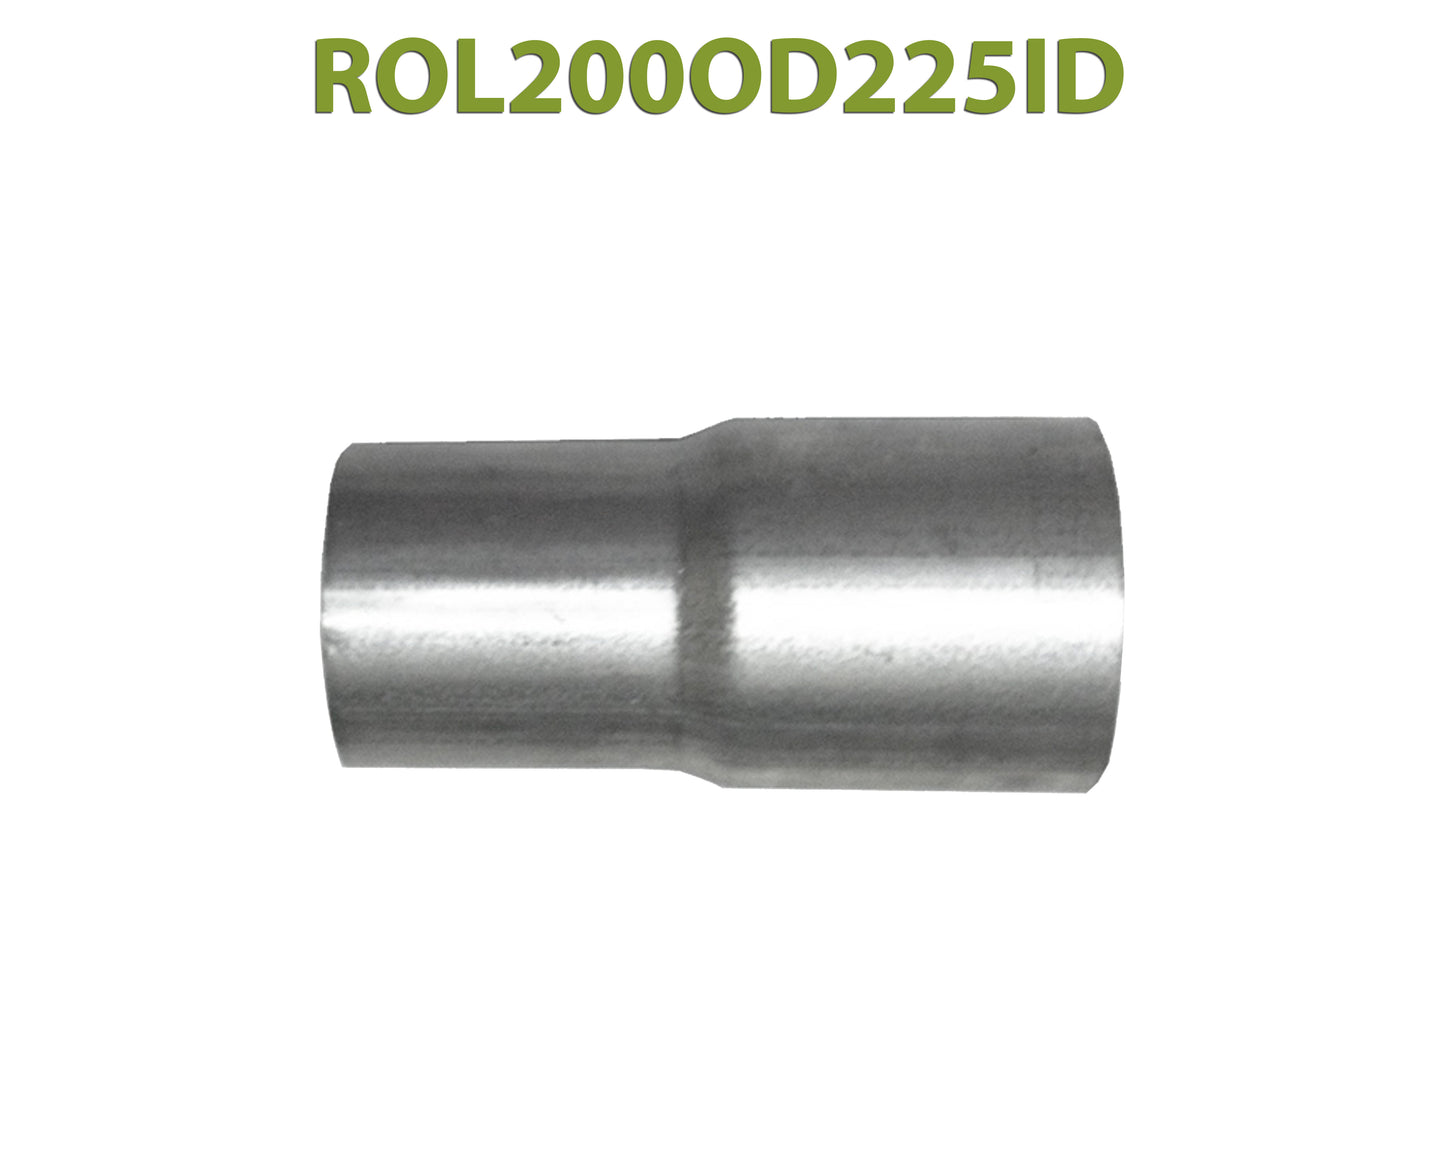 ROL200OD225ID 548502 2” OD to 2 1/4” ID Universal Exhaust Component to Pipe Adapter Reducer